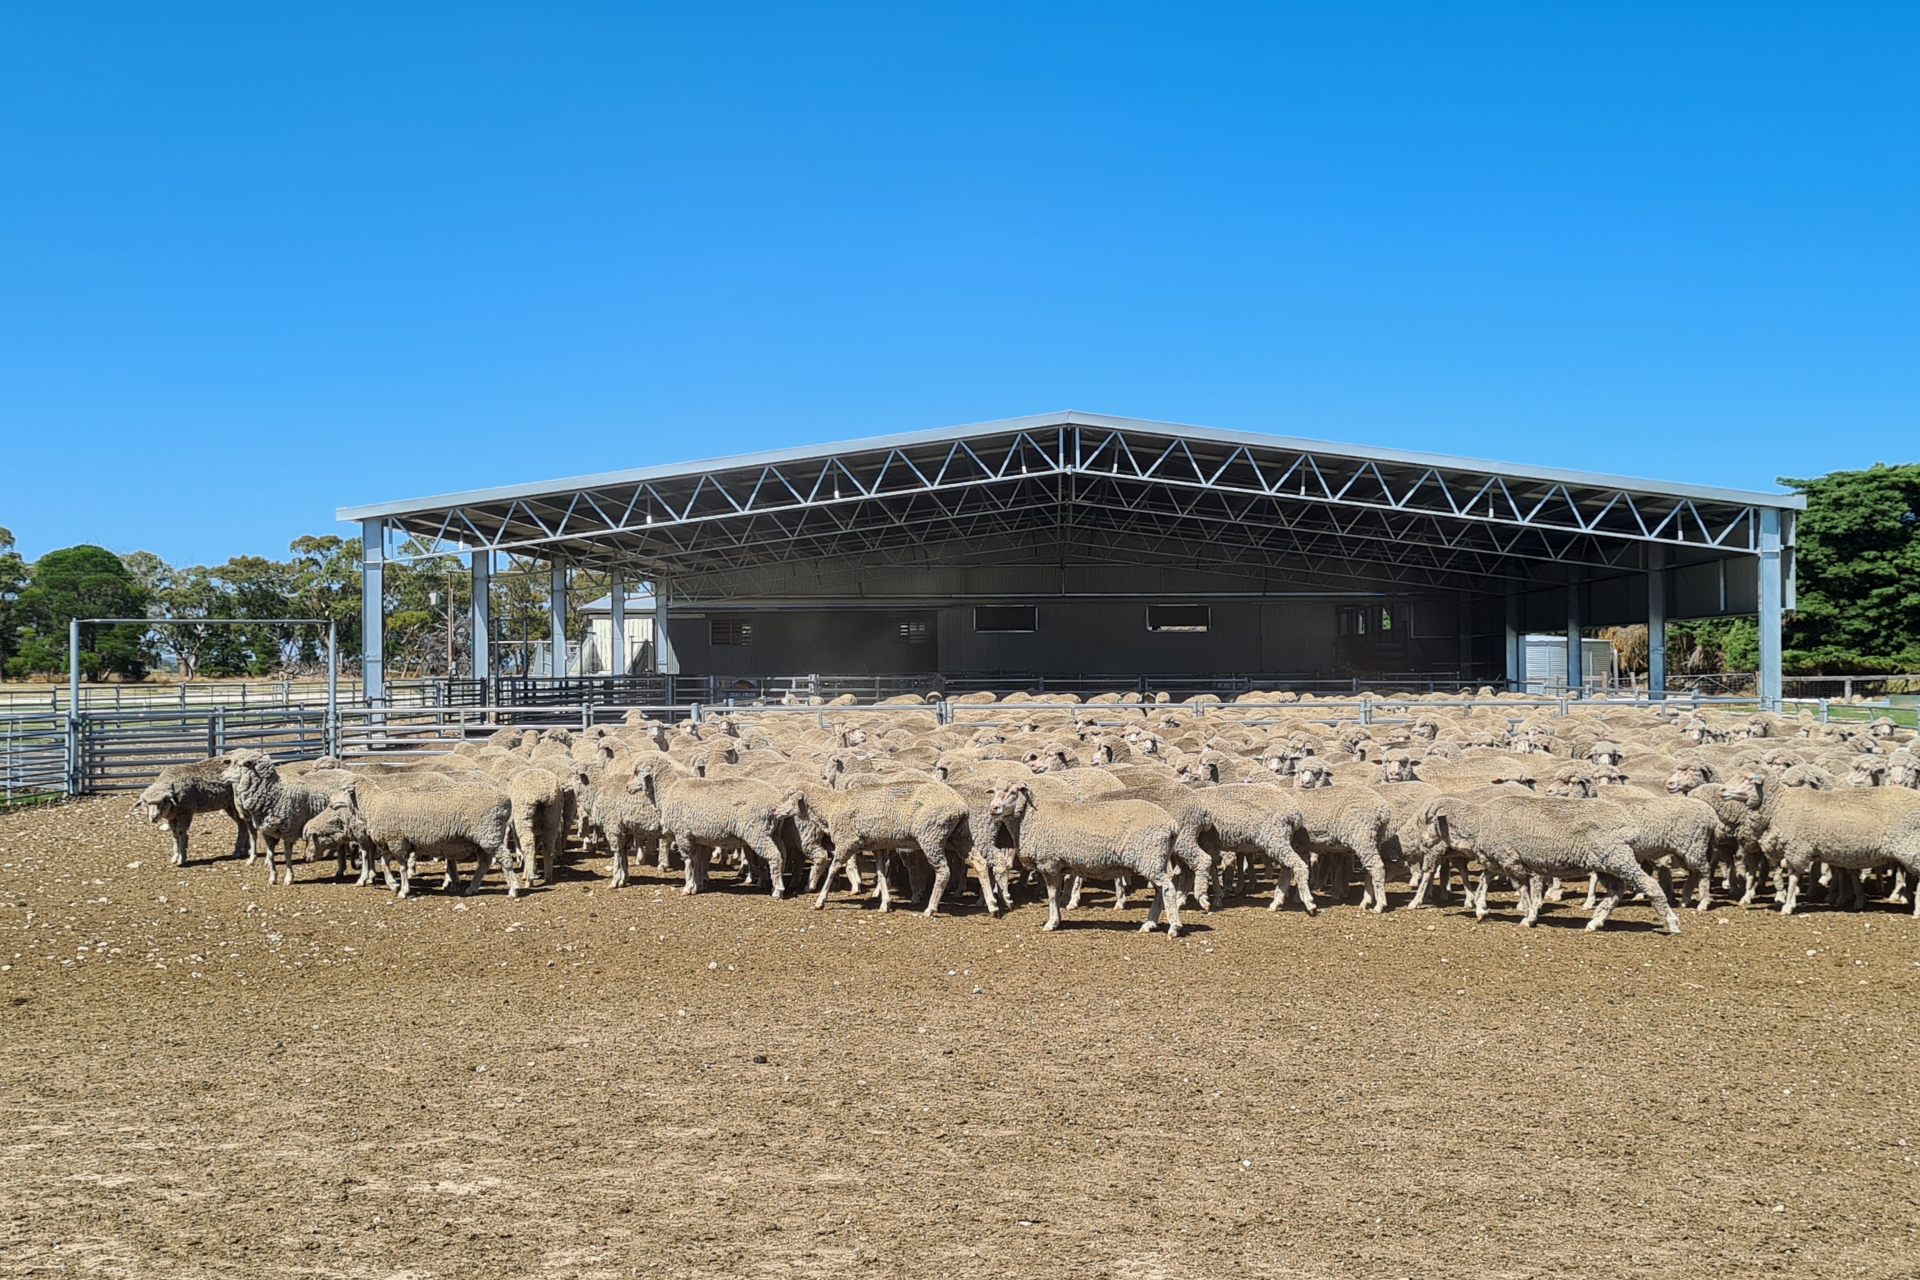 You are currently viewing 31m x 27m x 4.2m sheep yard cover